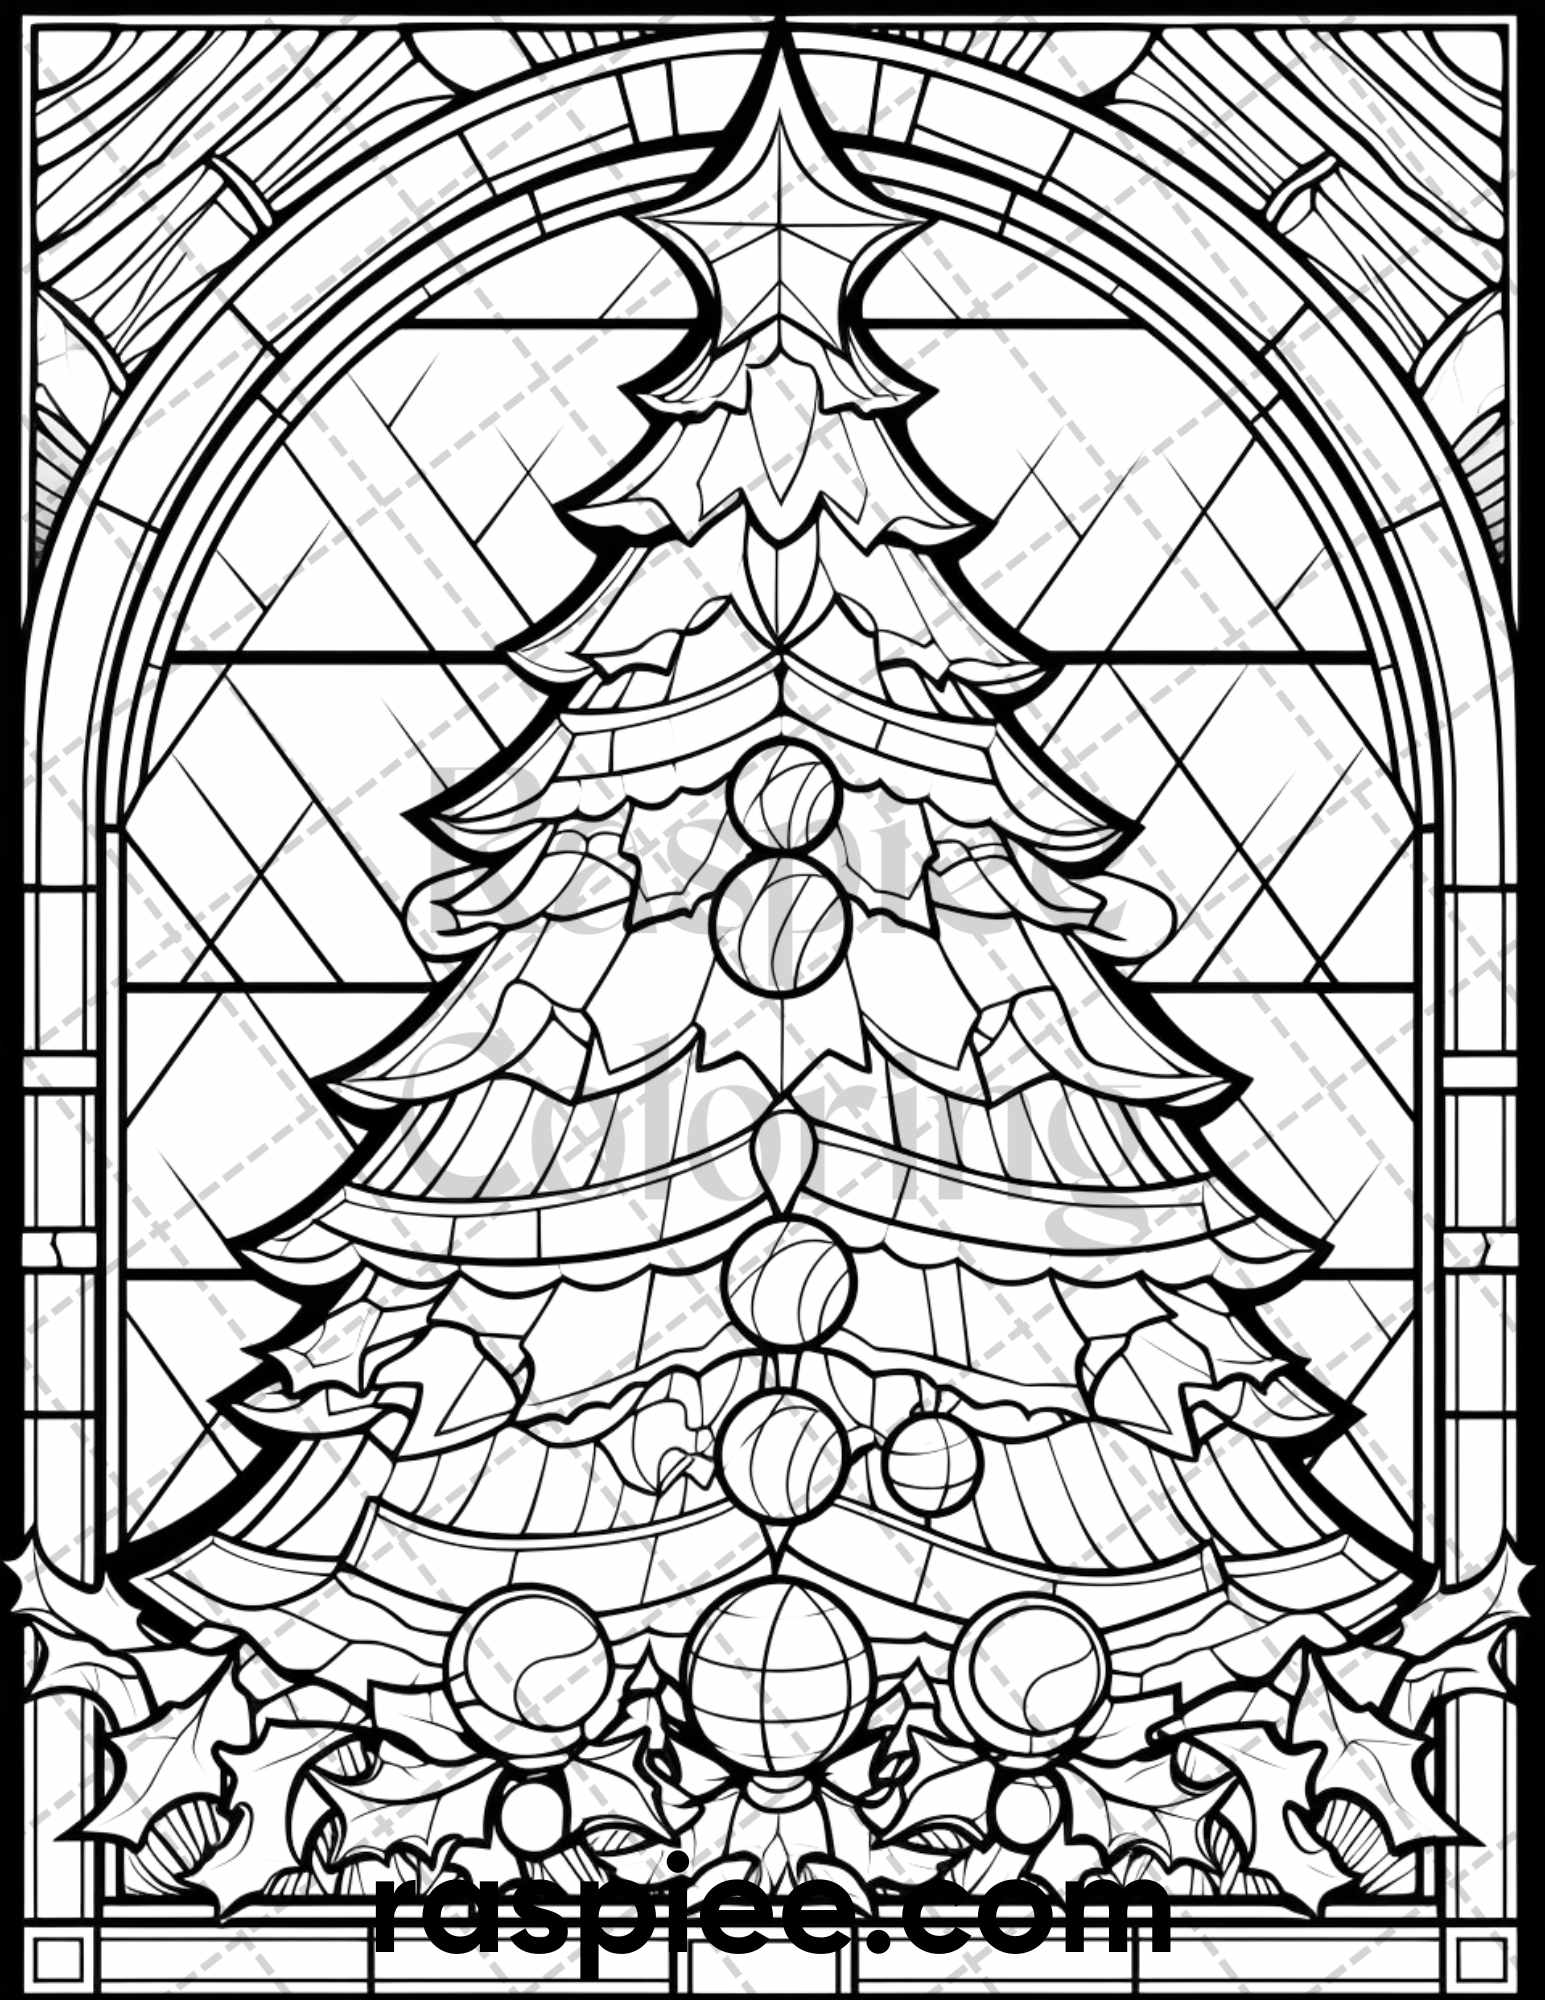 Christmas stained glass grayscale coloring pages for adults printa â coloring